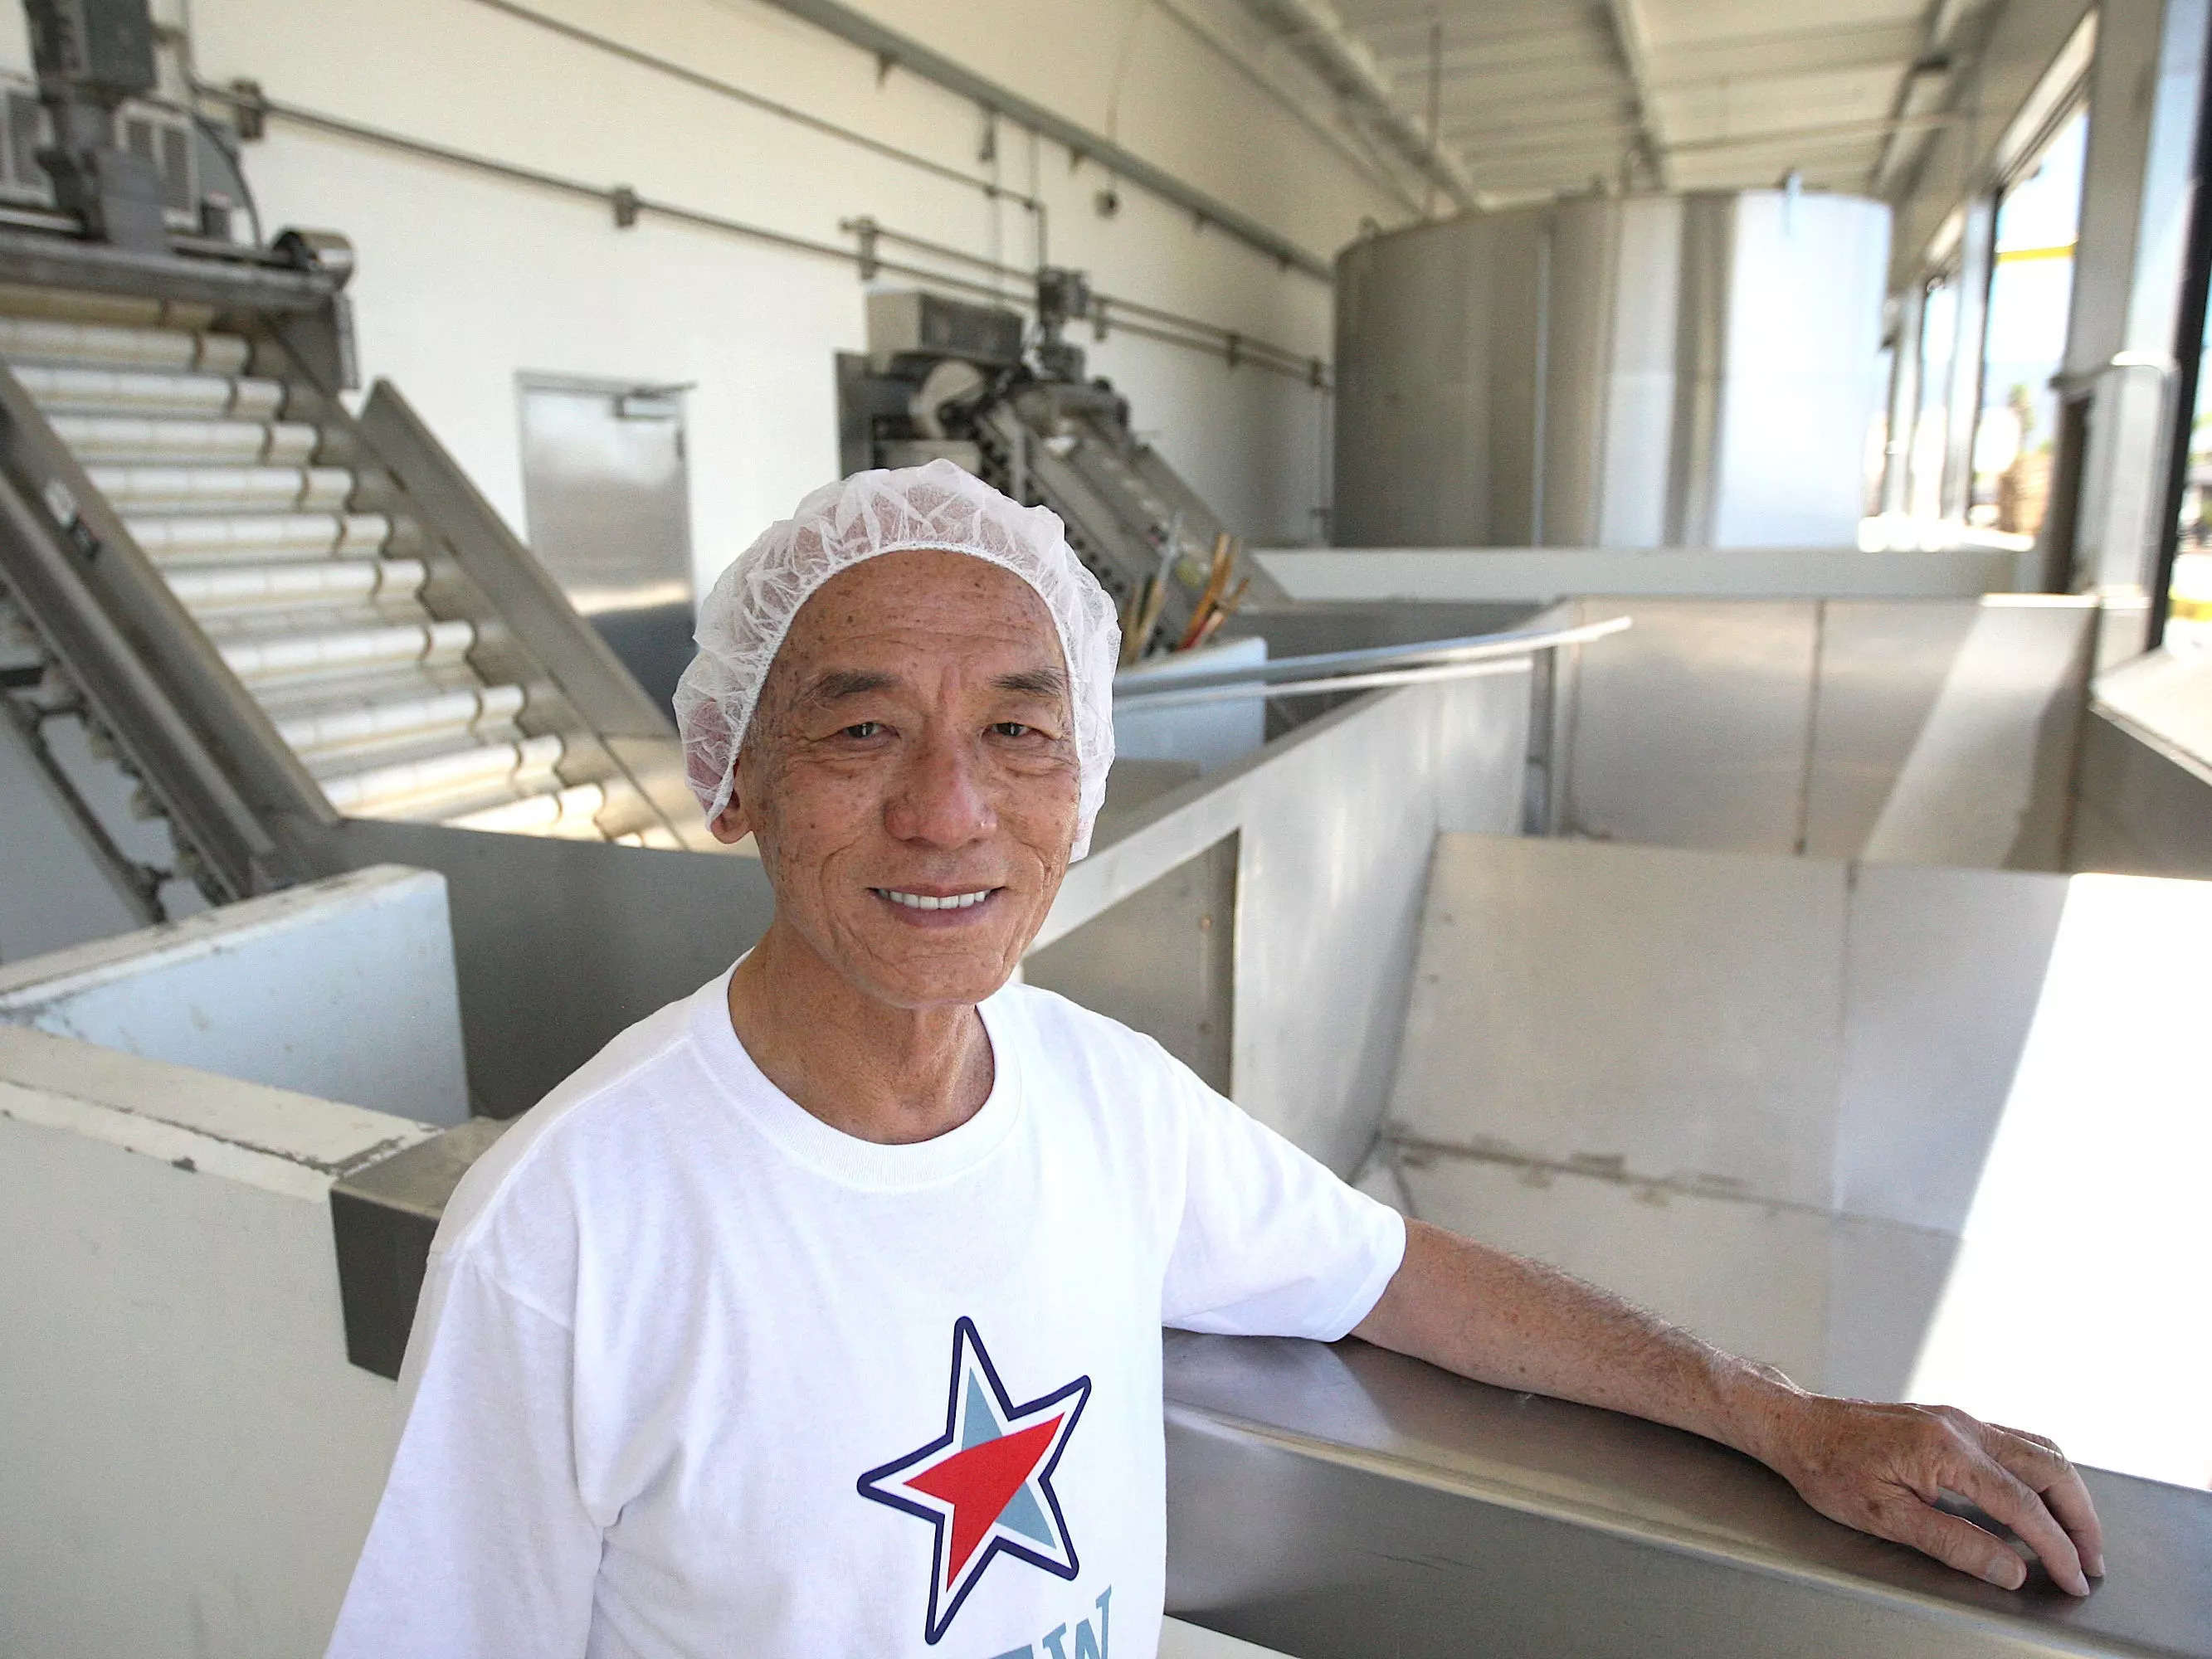 Huy Fong Foods CEO David Tran poses next to hoppers where chilies are delivered during chili crushing season at the Sriracha Hot Chili Sauce factory on May 14, 2014 in Irwindale, California.